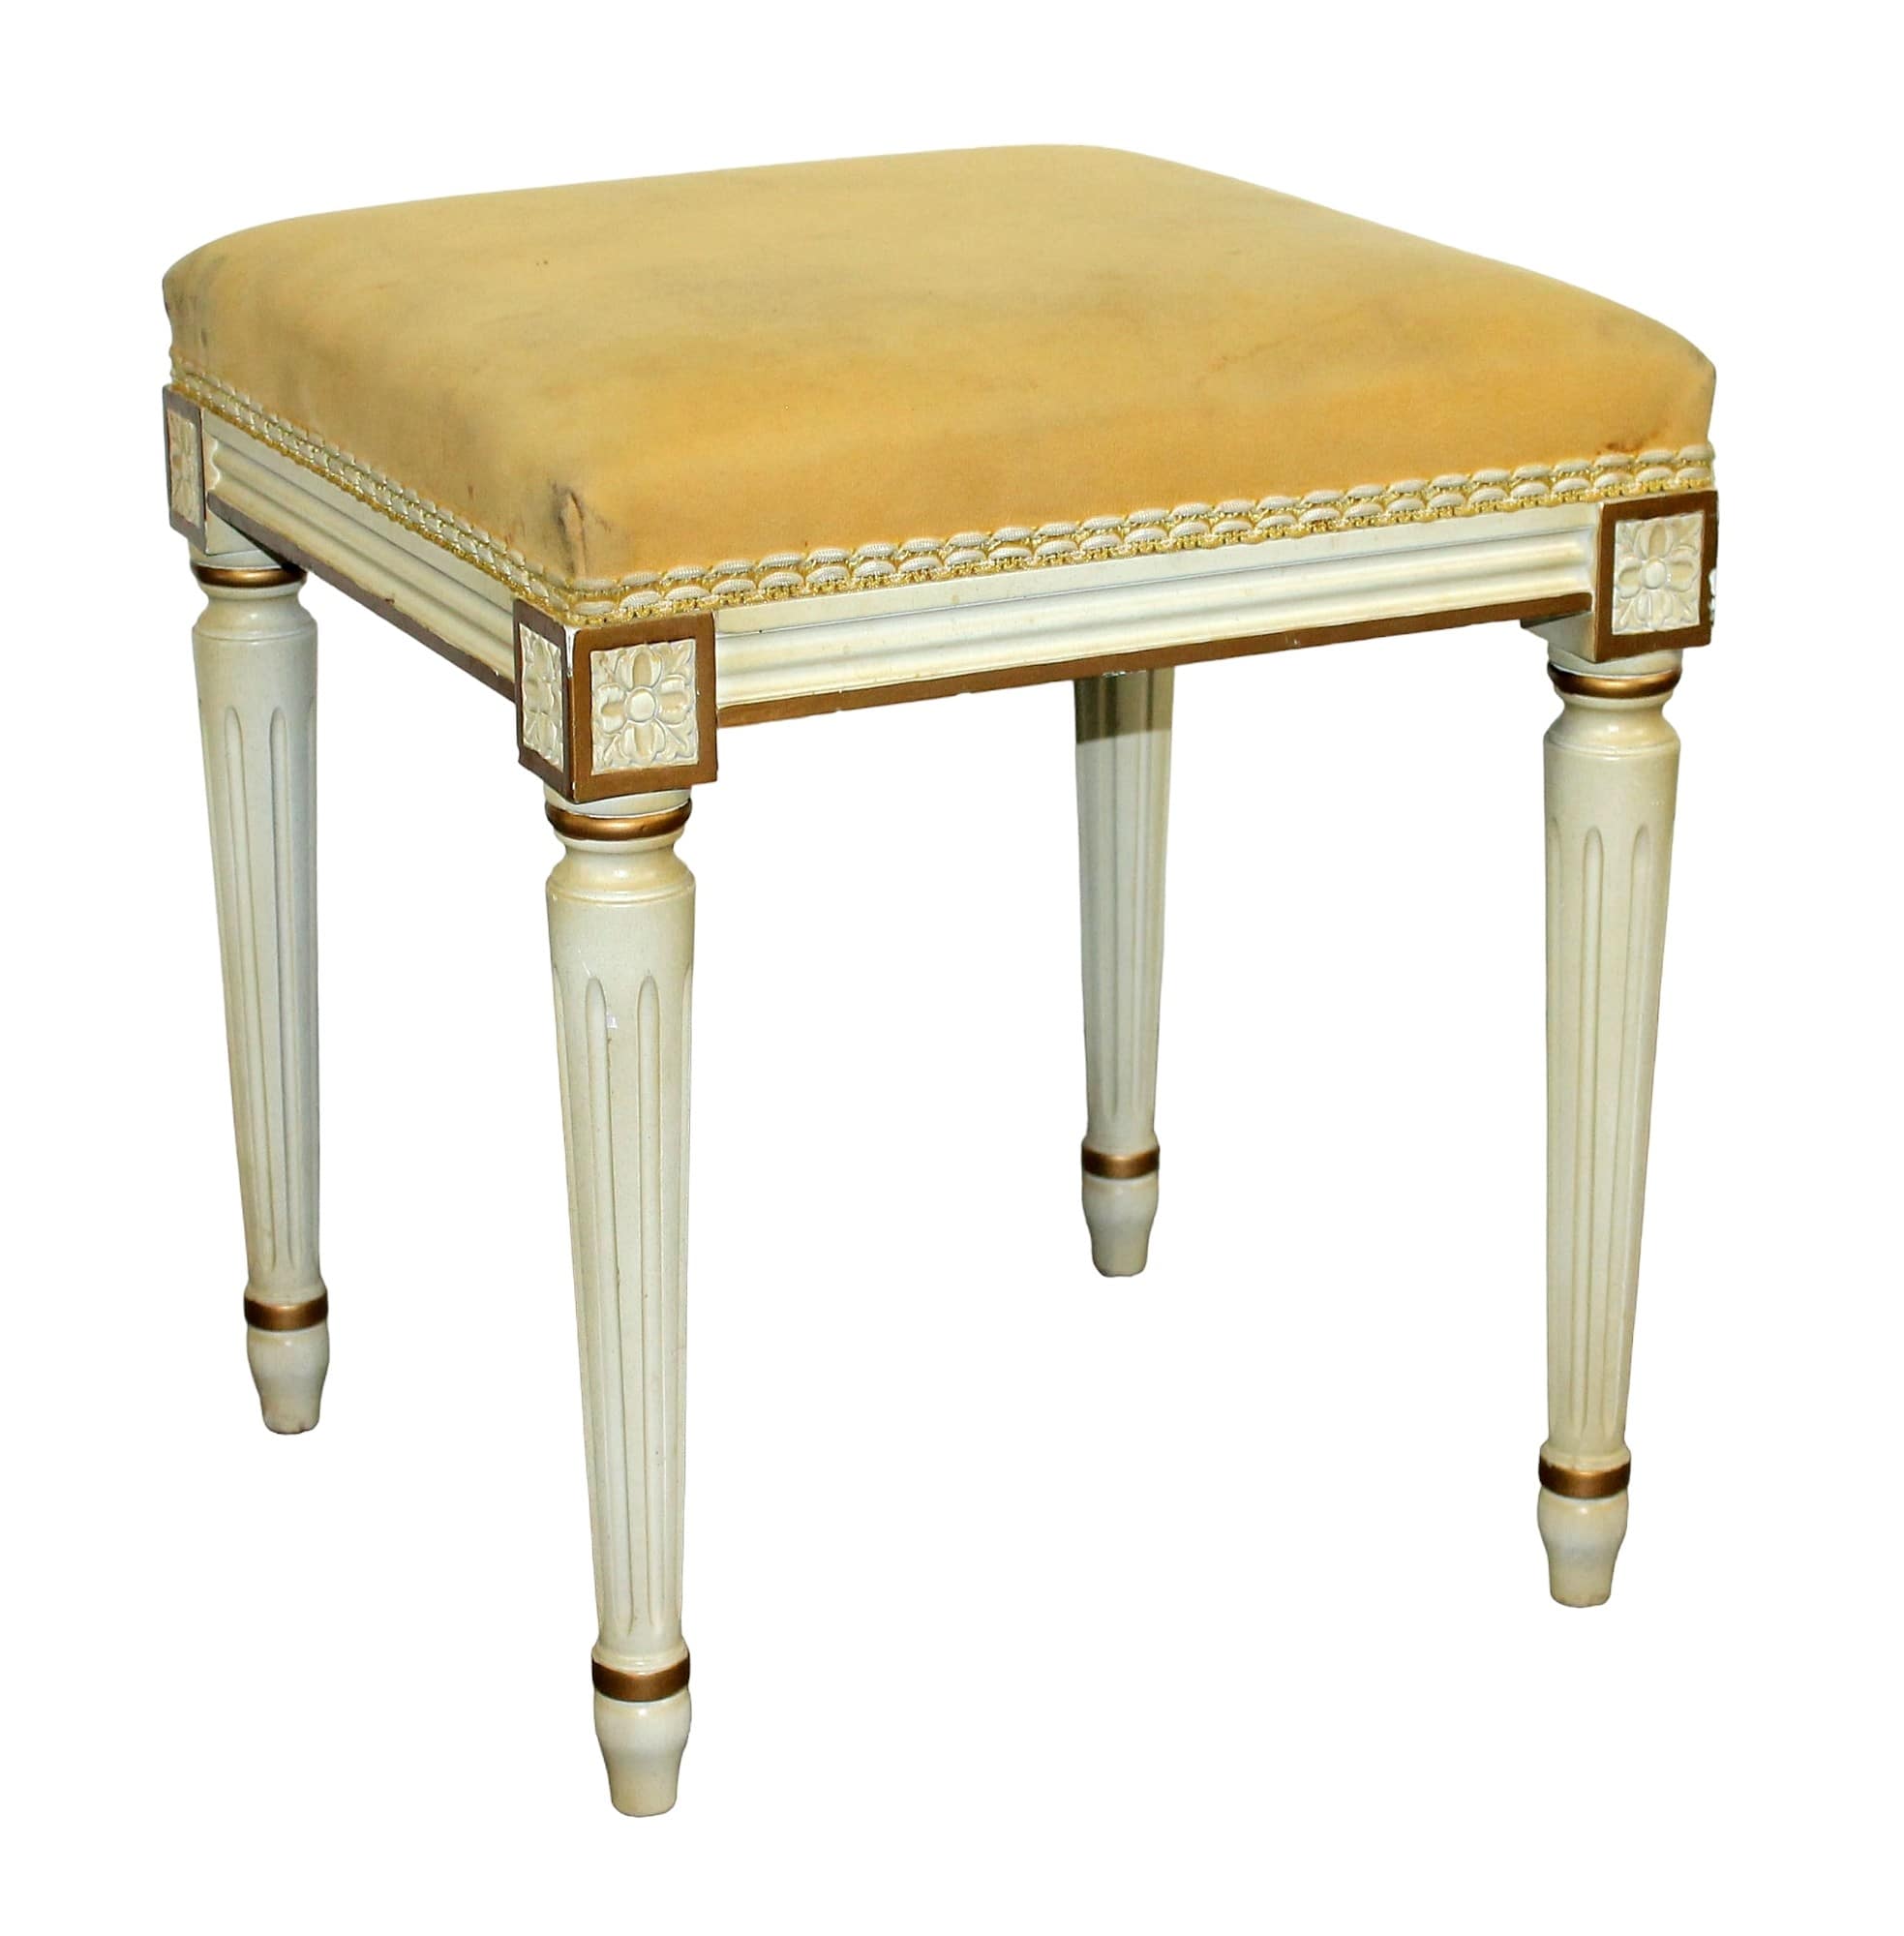 French Louis XVI style painted stool